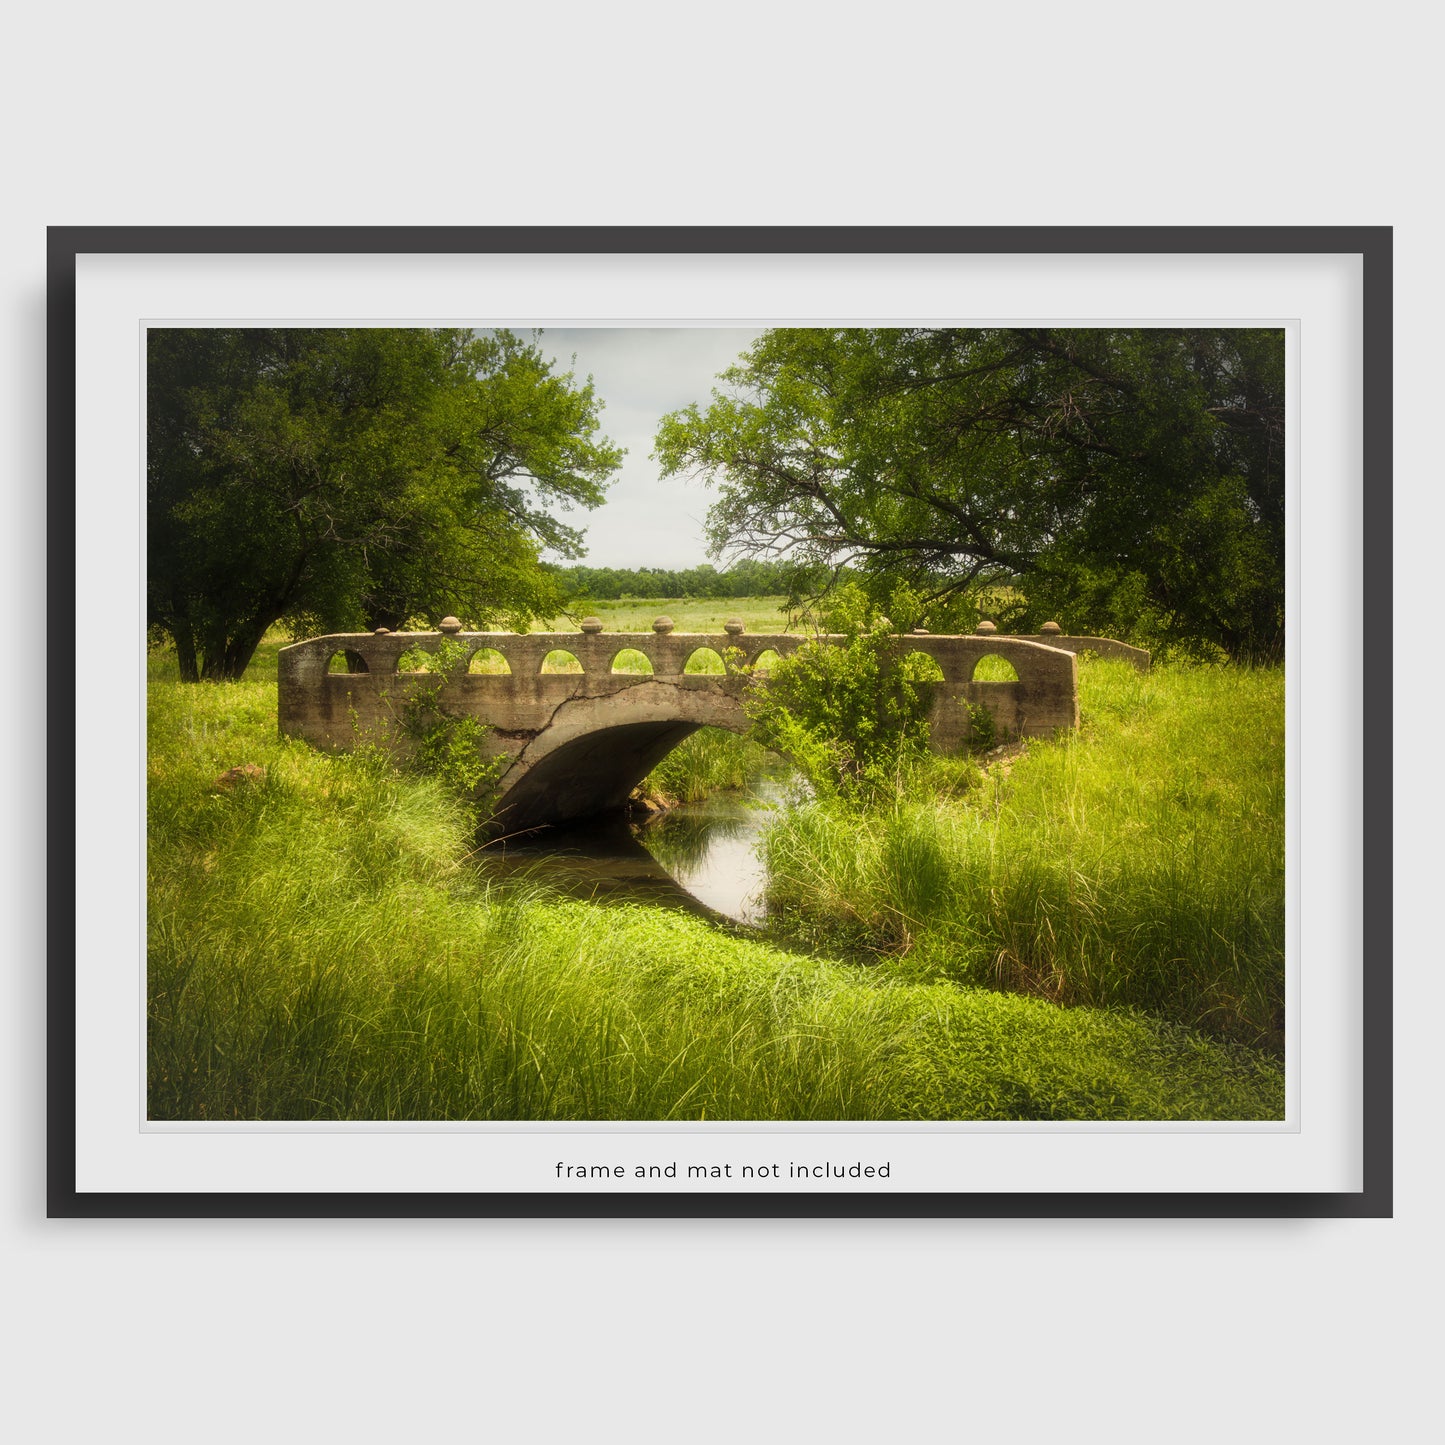 Image displaying a Kansas bridge wall art print within a thin black frame and white mat, meant to inspire potential display options. The actual product is the print only; the frame and mat are not included with purchase.